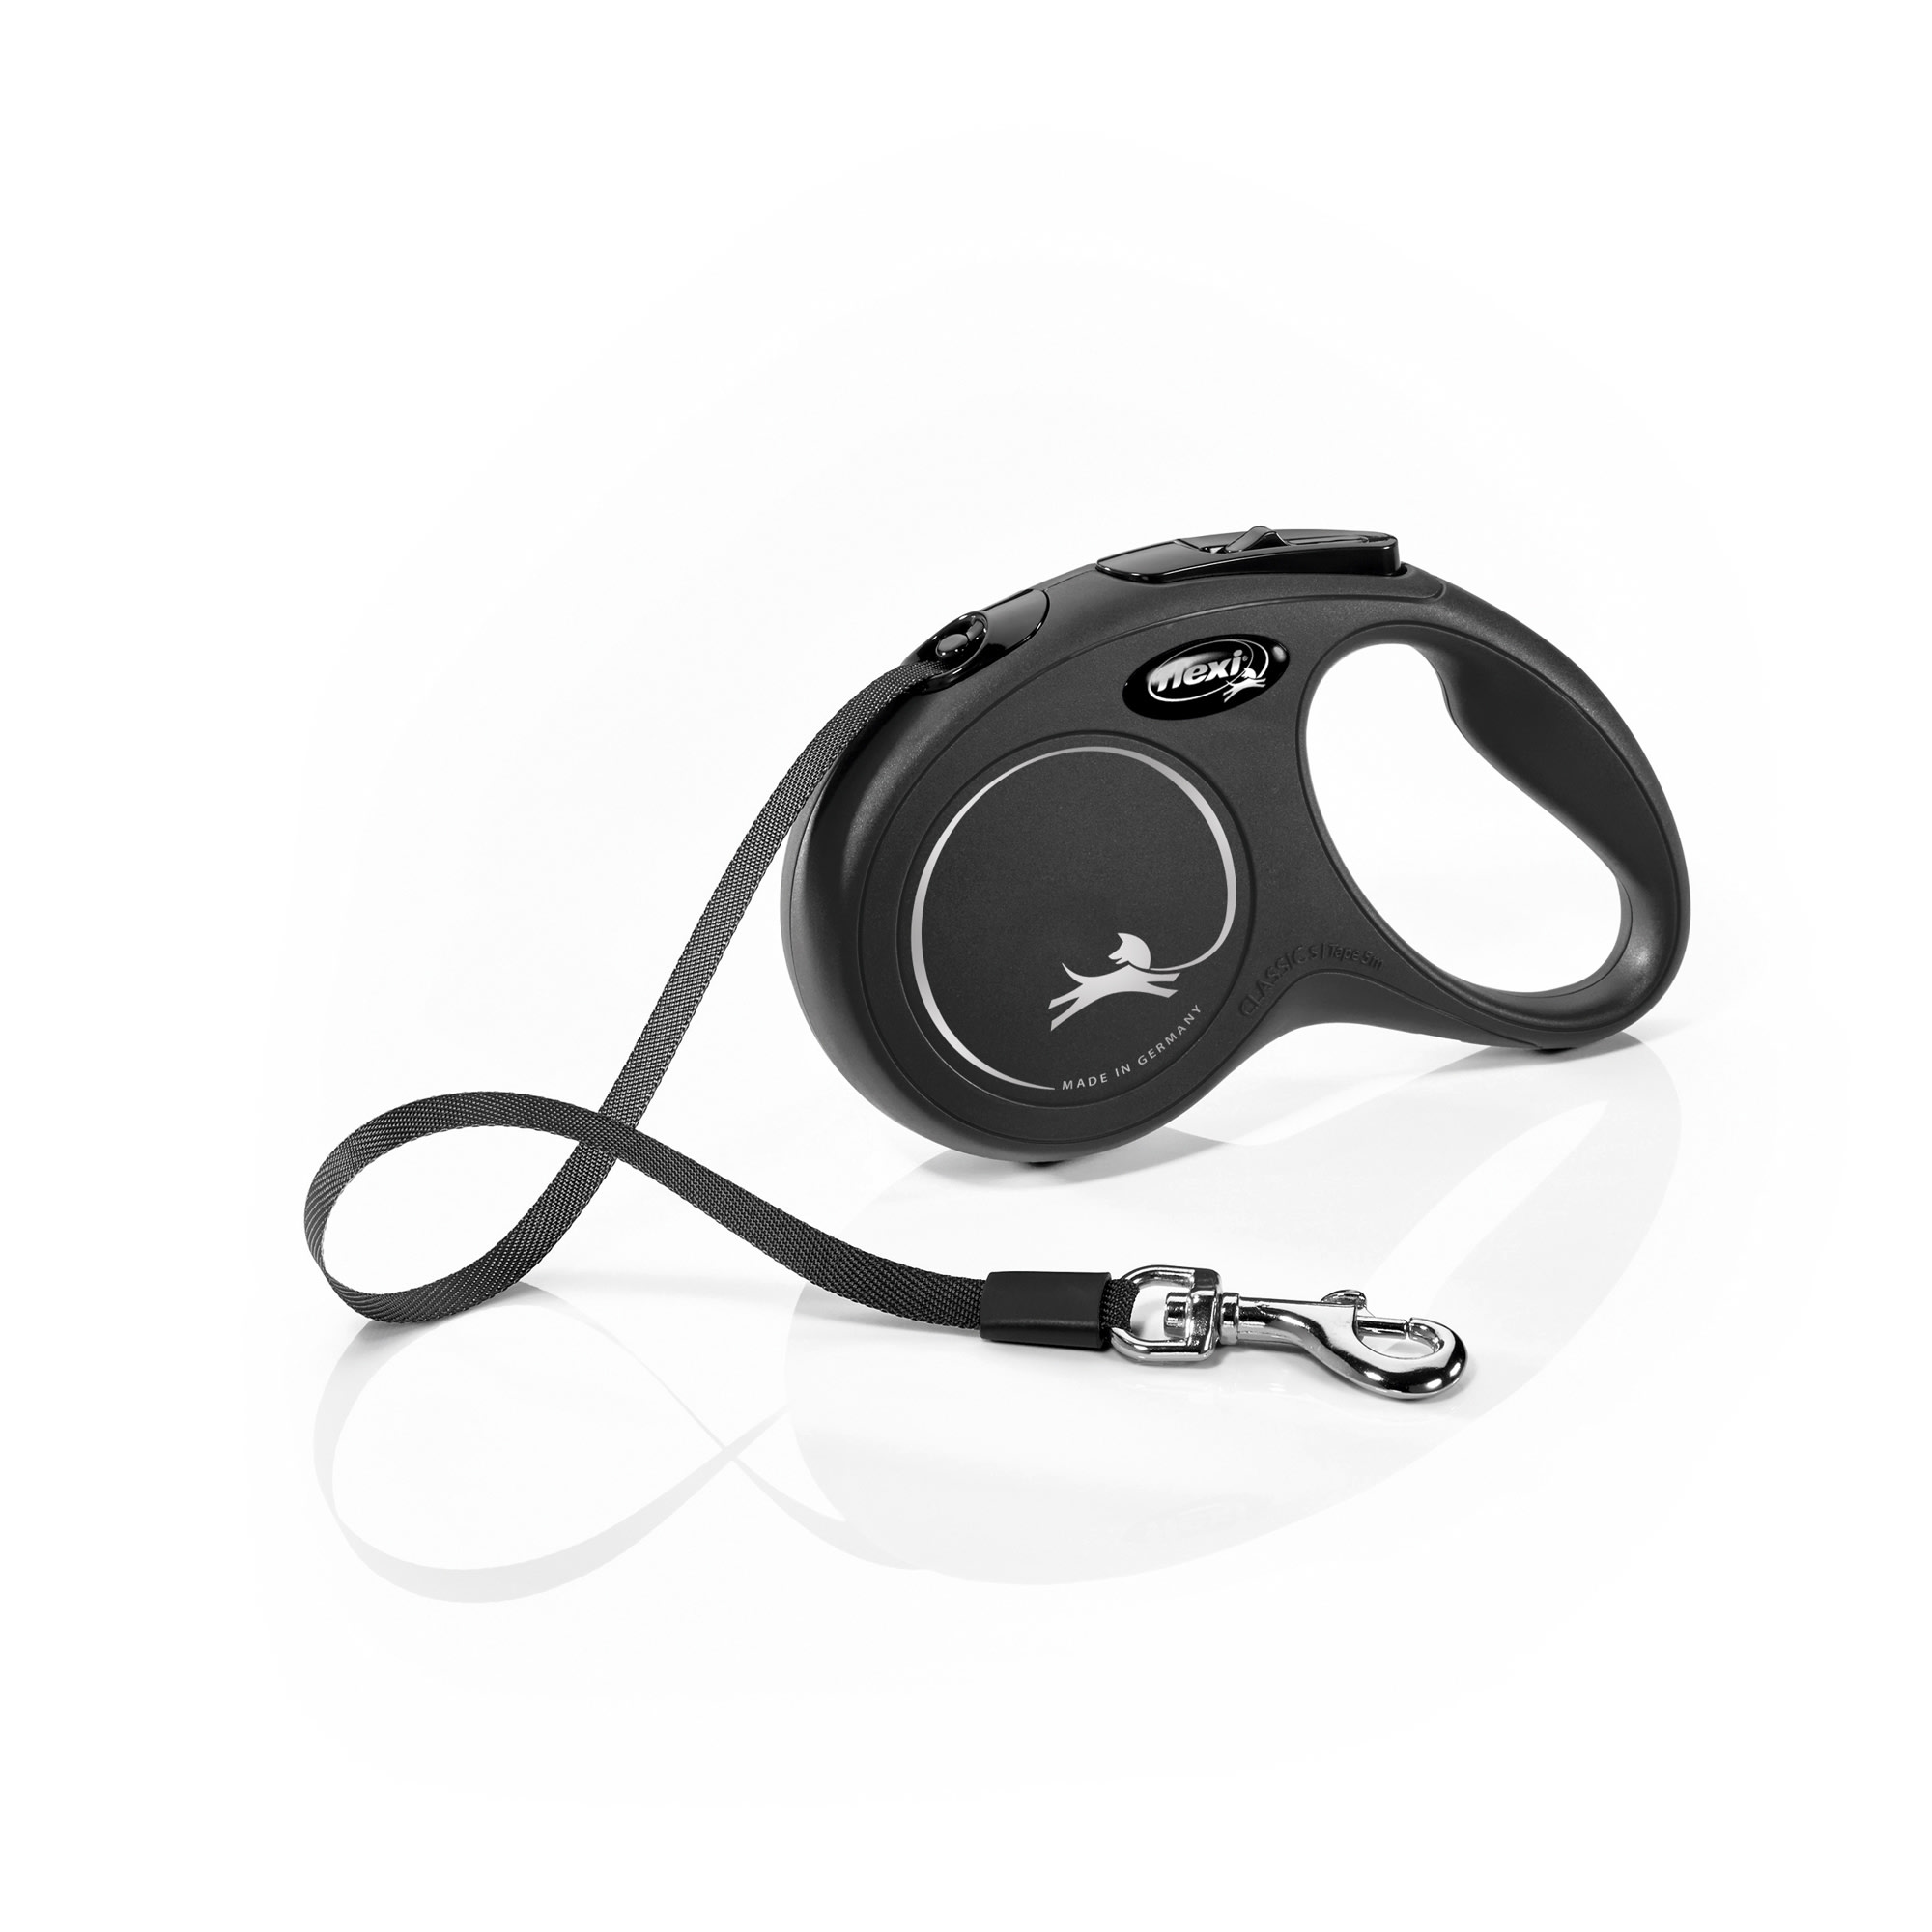 UPC 840317107630 product image for Flexi New Classic Tape Retractable Dog Leash in Black, 16' ft., Small, Black | upcitemdb.com